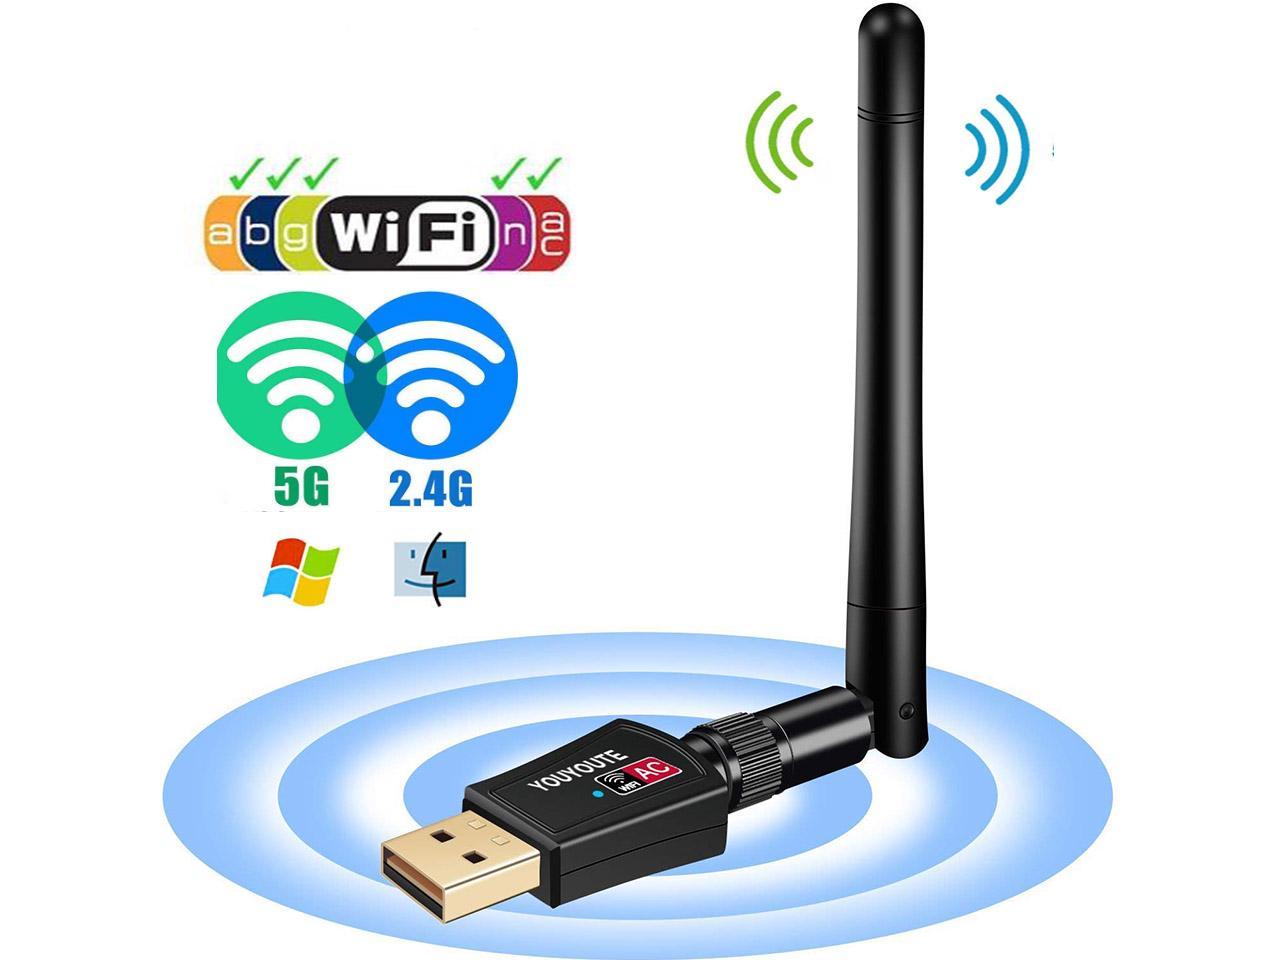 150Mbps USB 802.11n Wi-Fi Ethernet Wireless Adapter Card with 2dbi HG Antenna 